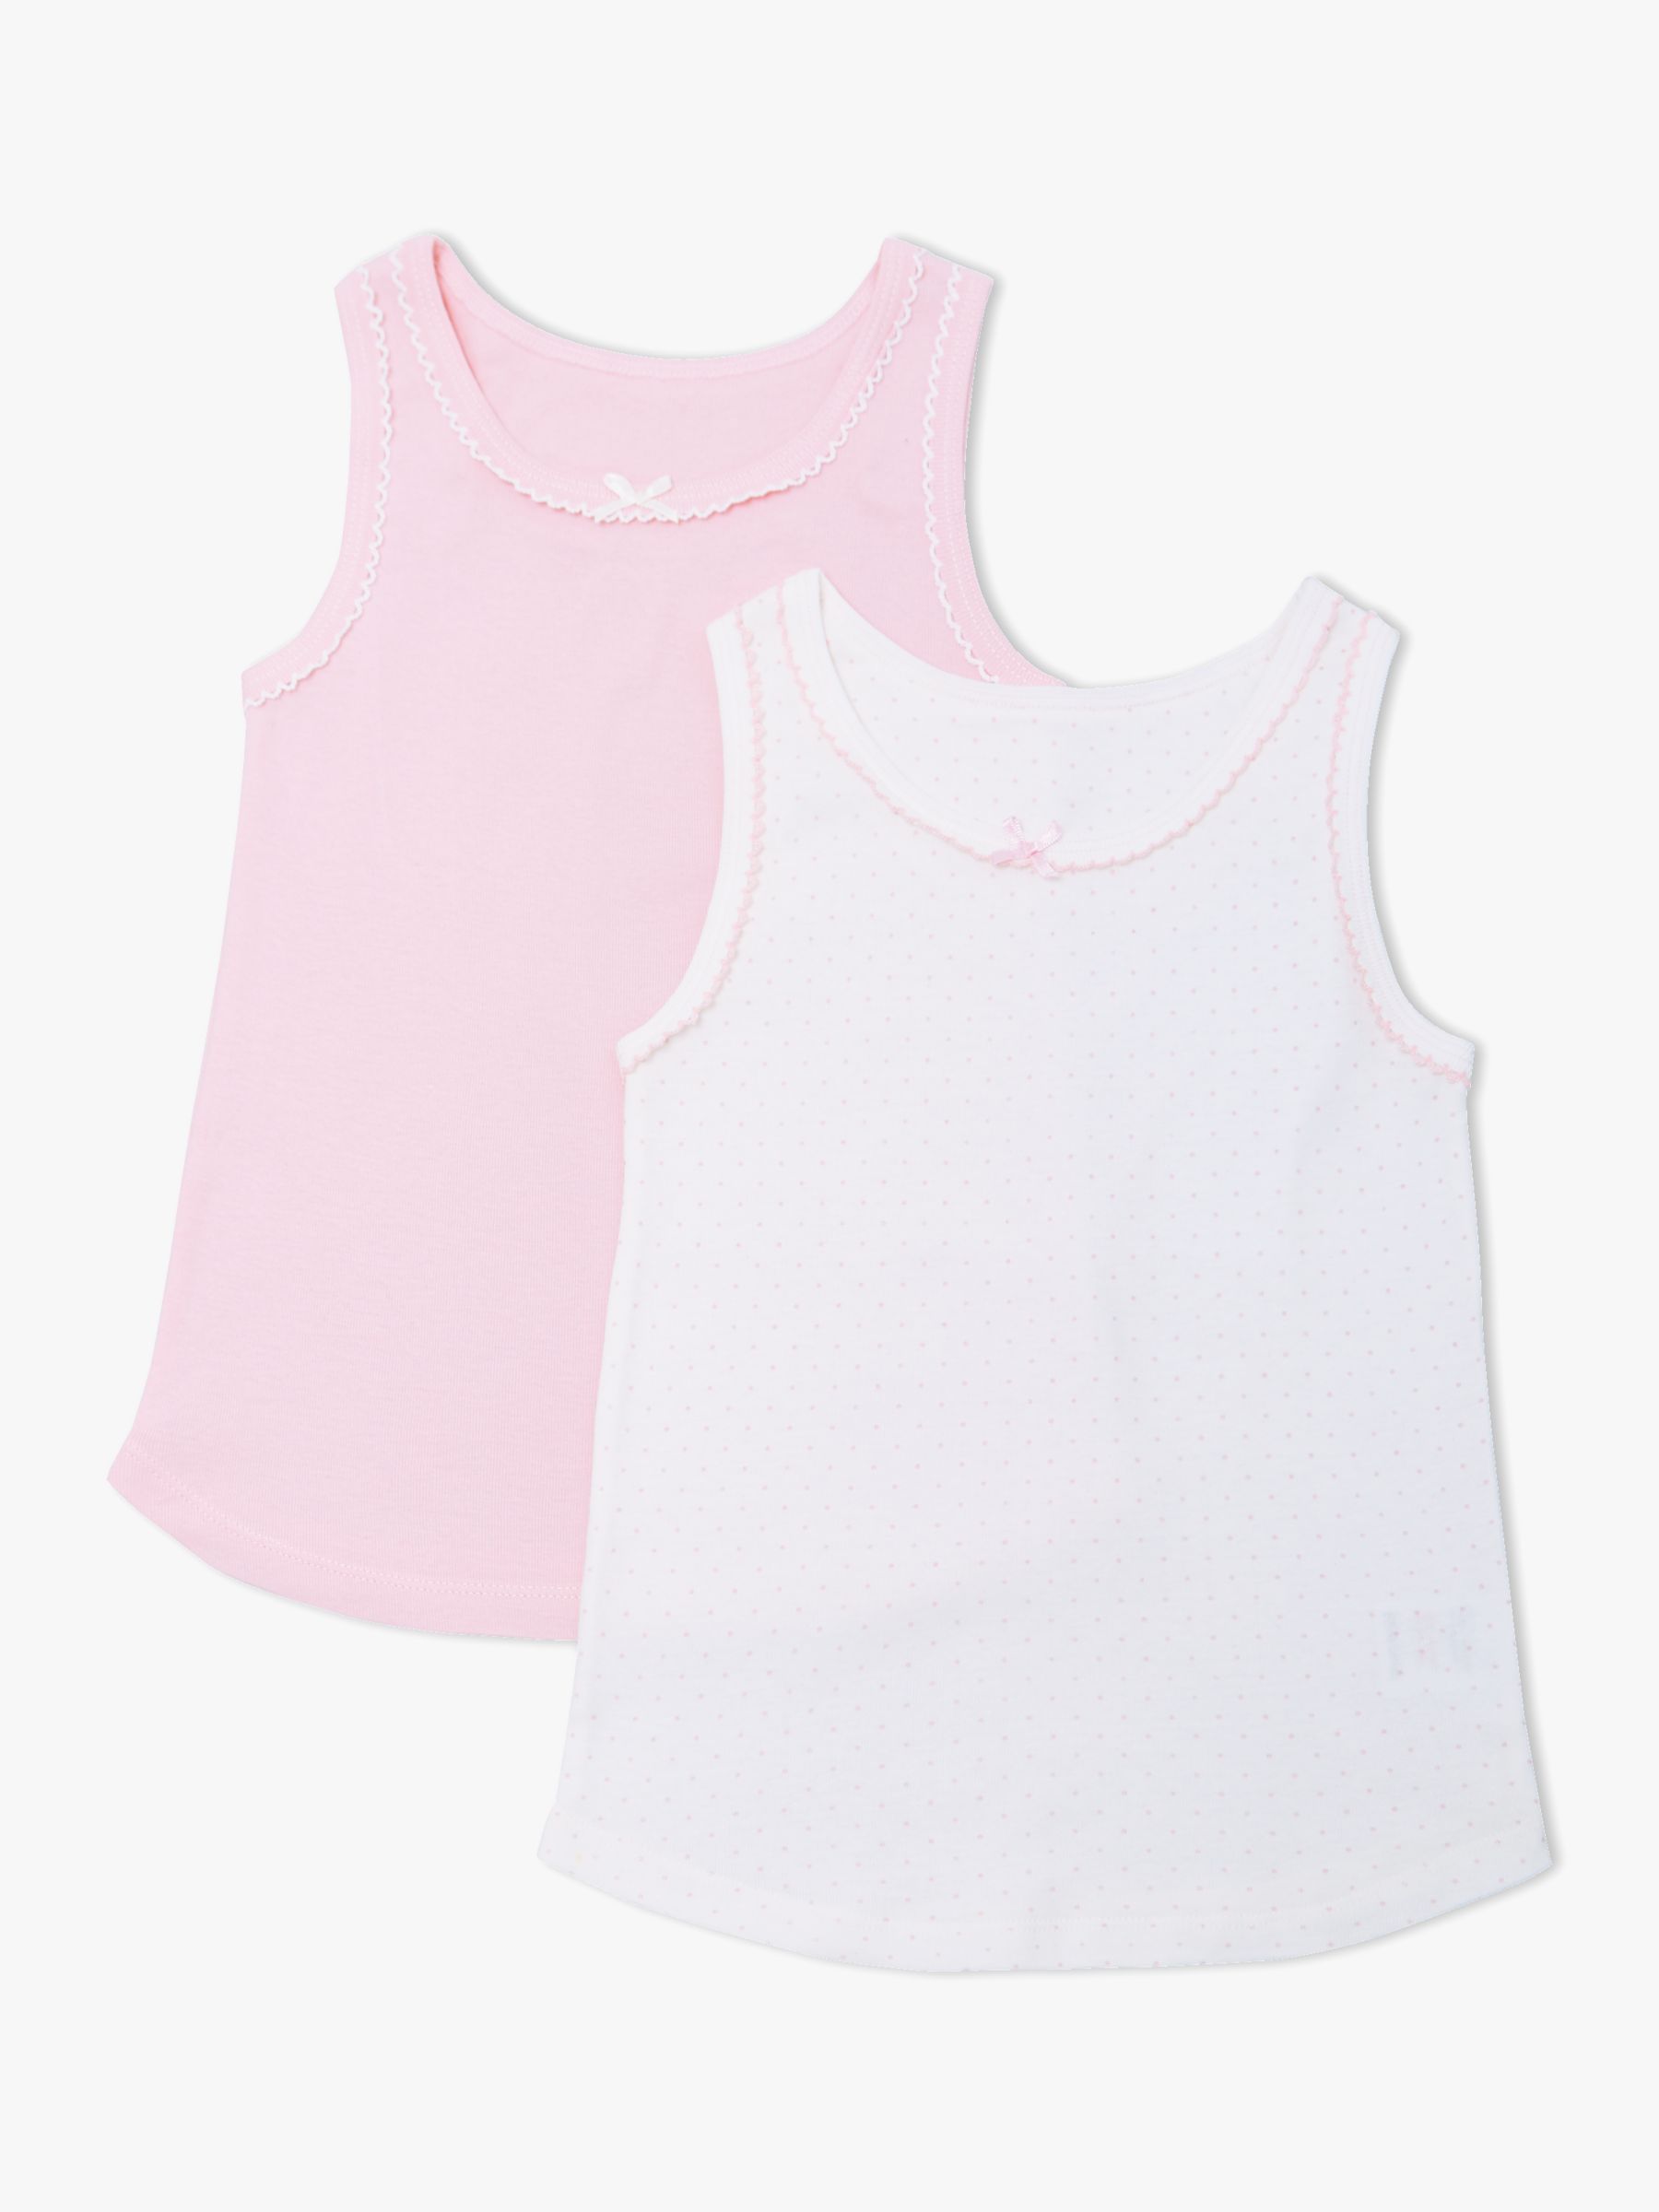 Tank Top Girls Vests 100% Cotton Pack of 5 